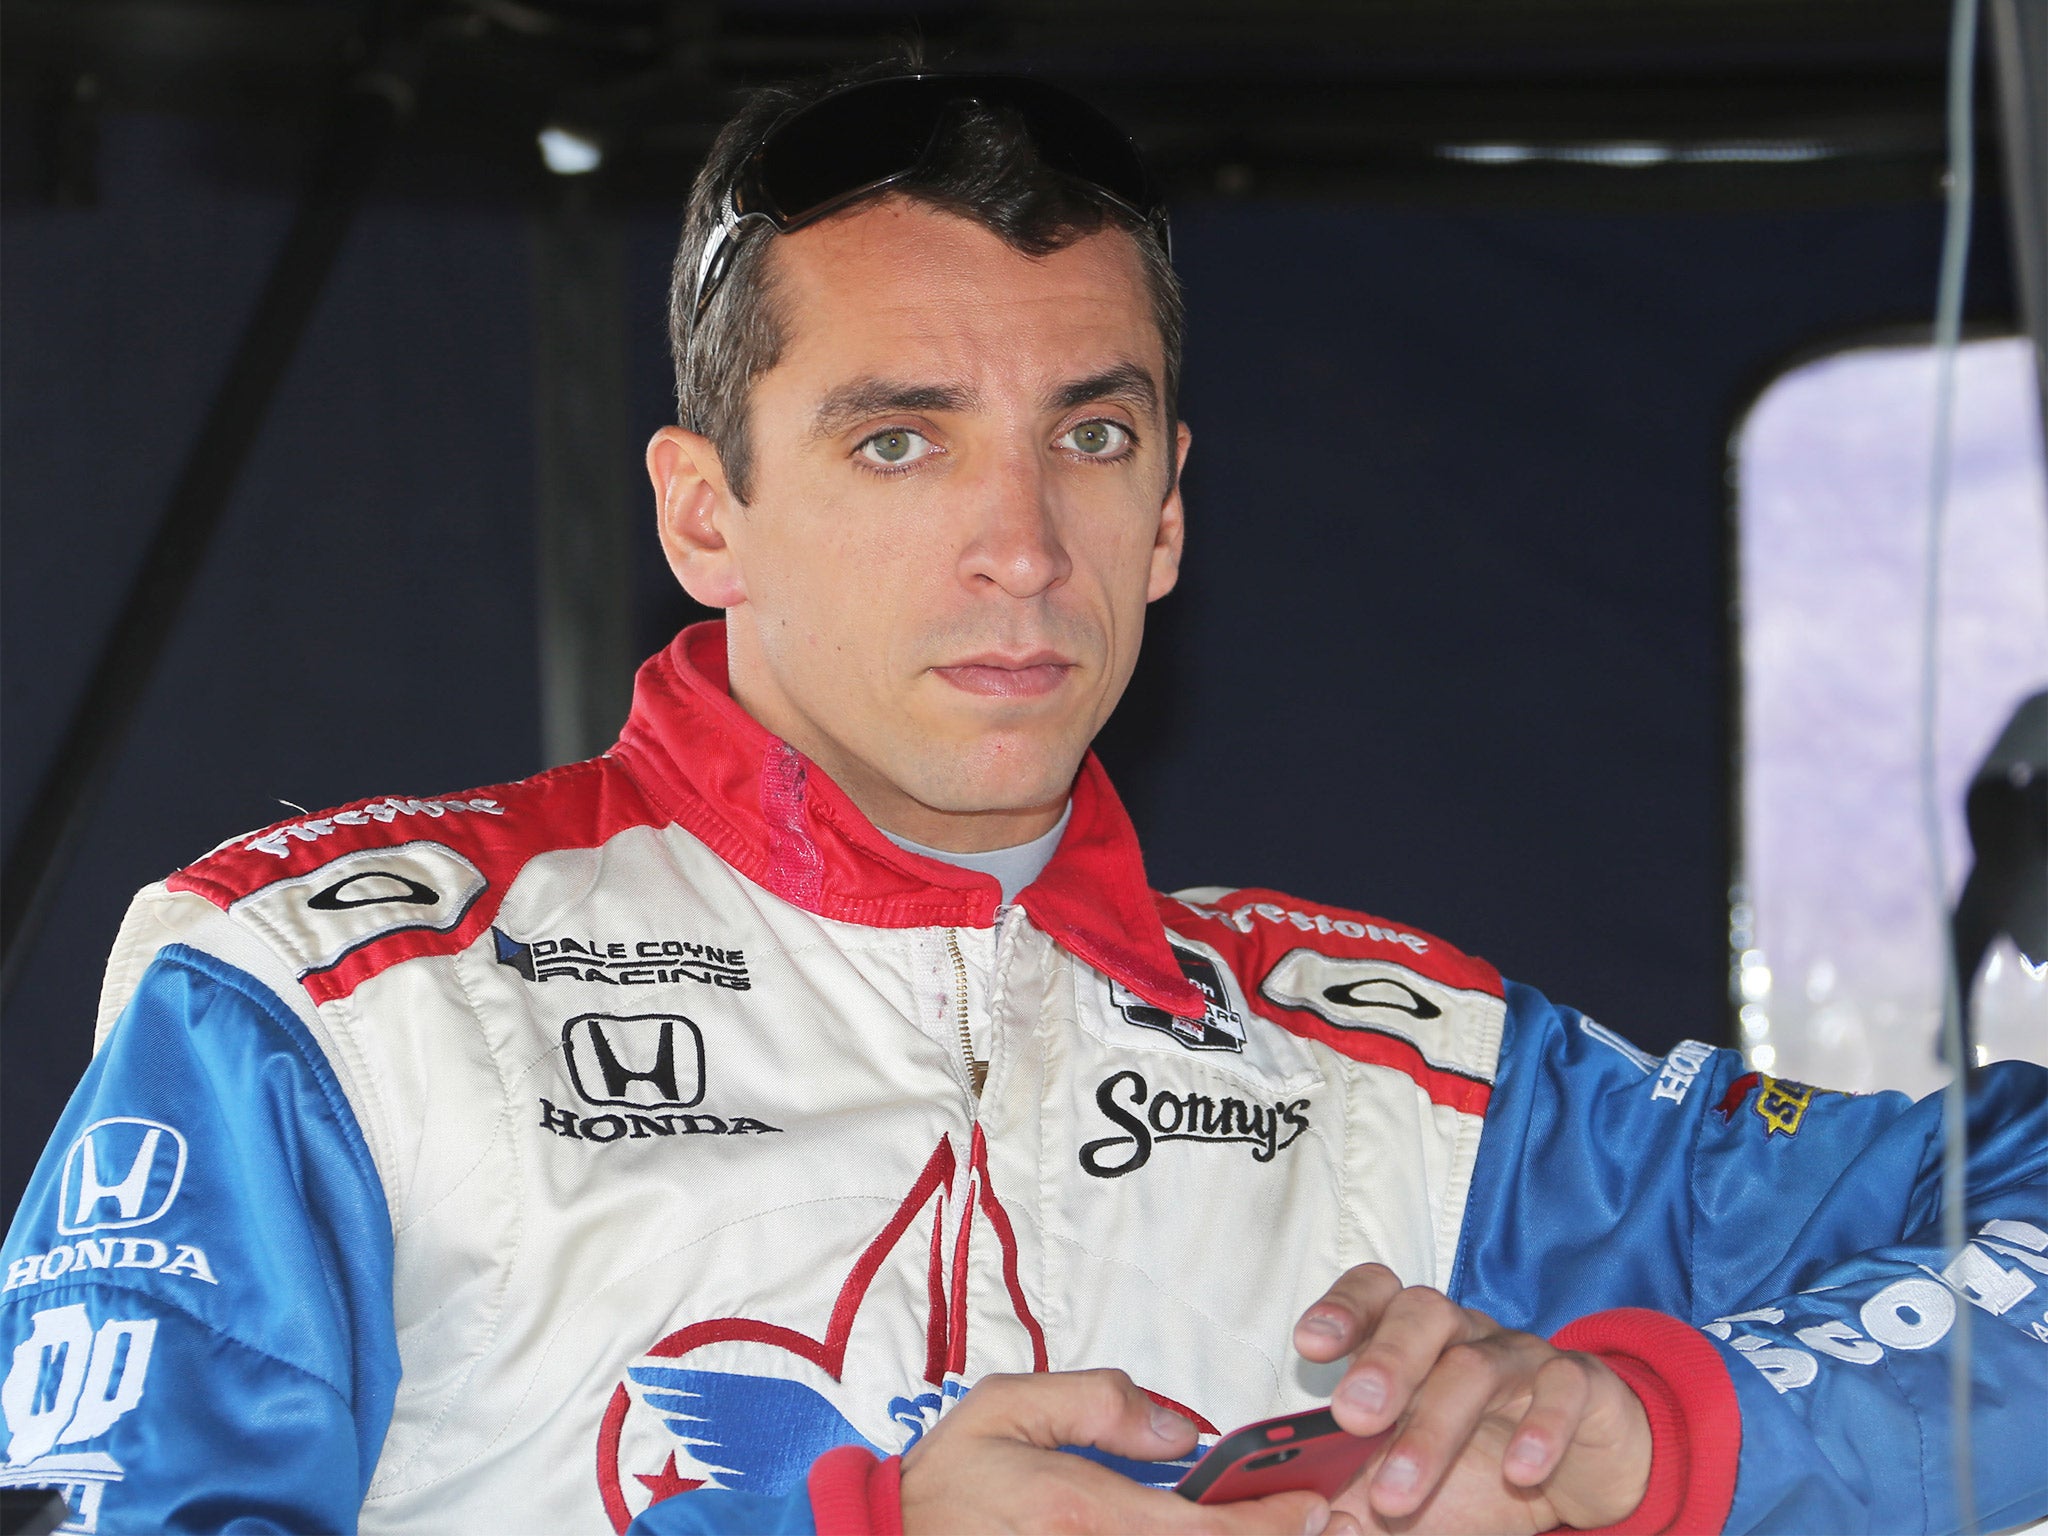 Justin Wilson died on Monday of head injuries sustained in an IndyCar crash on Sunday